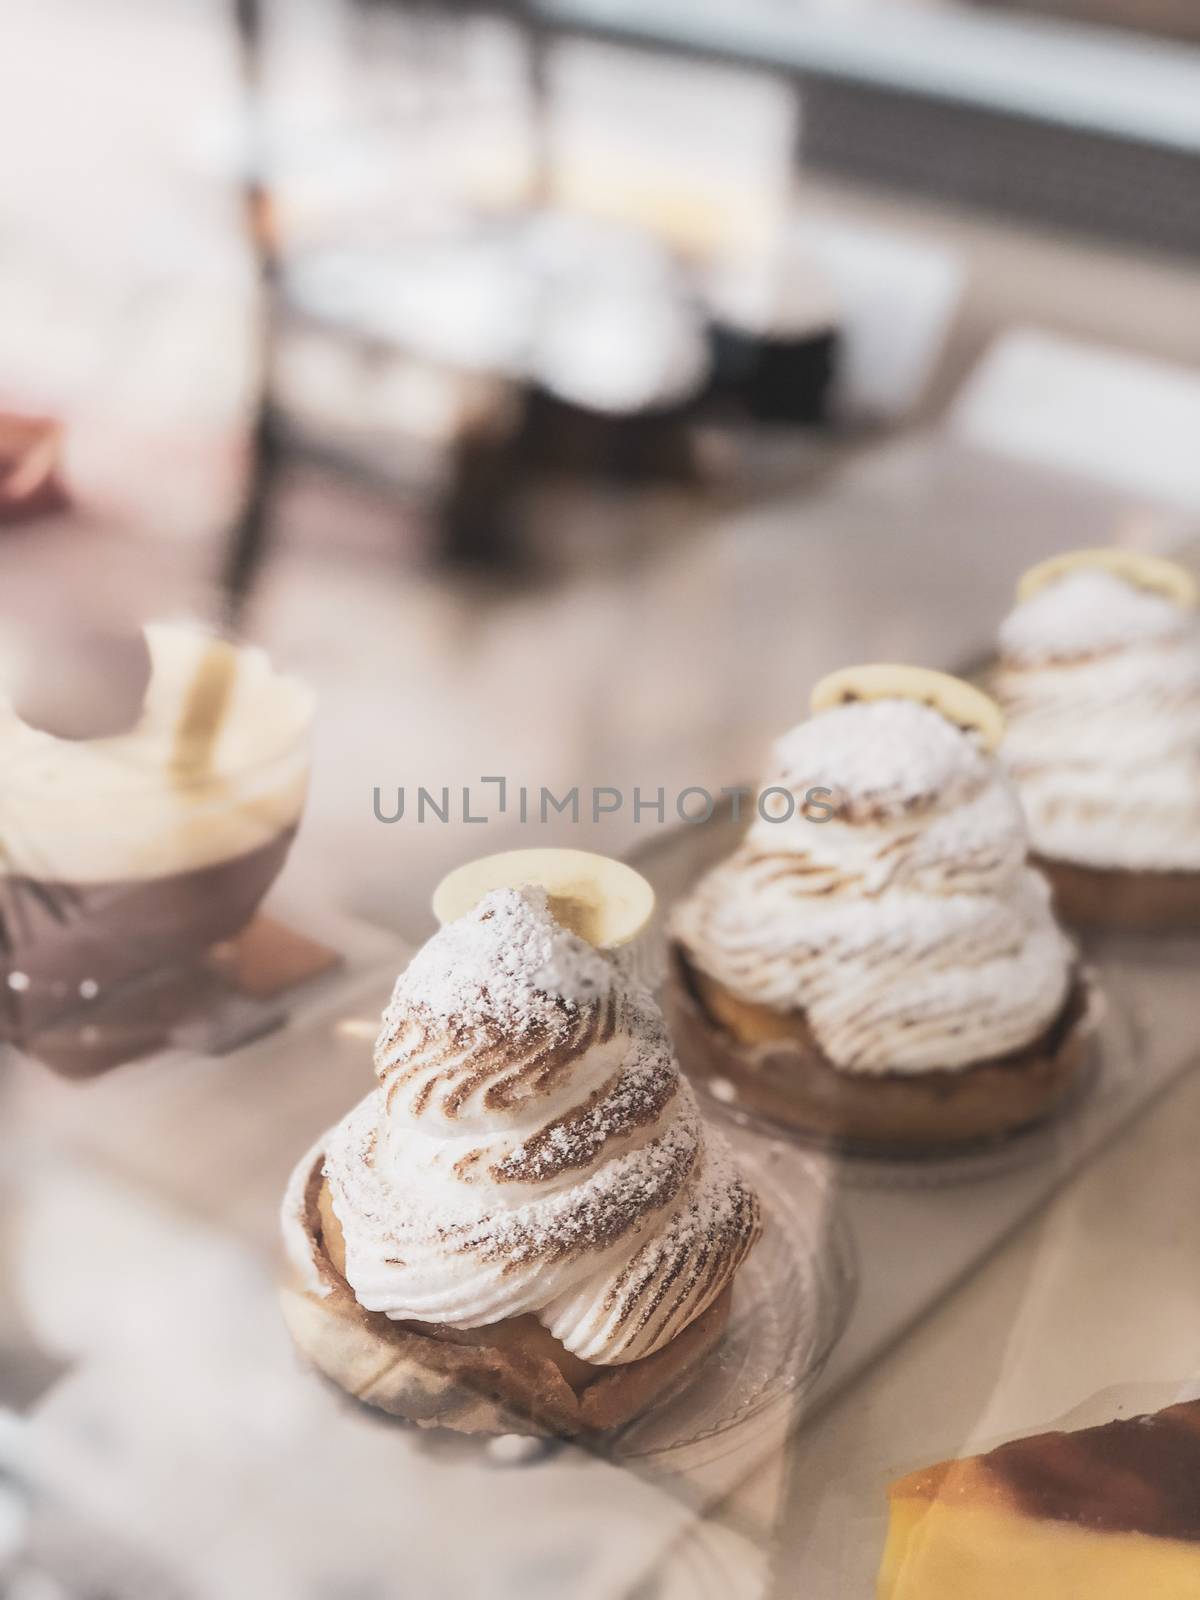 Tartlet with Italian meringue and lemon cream on a wooden stand, selective focus